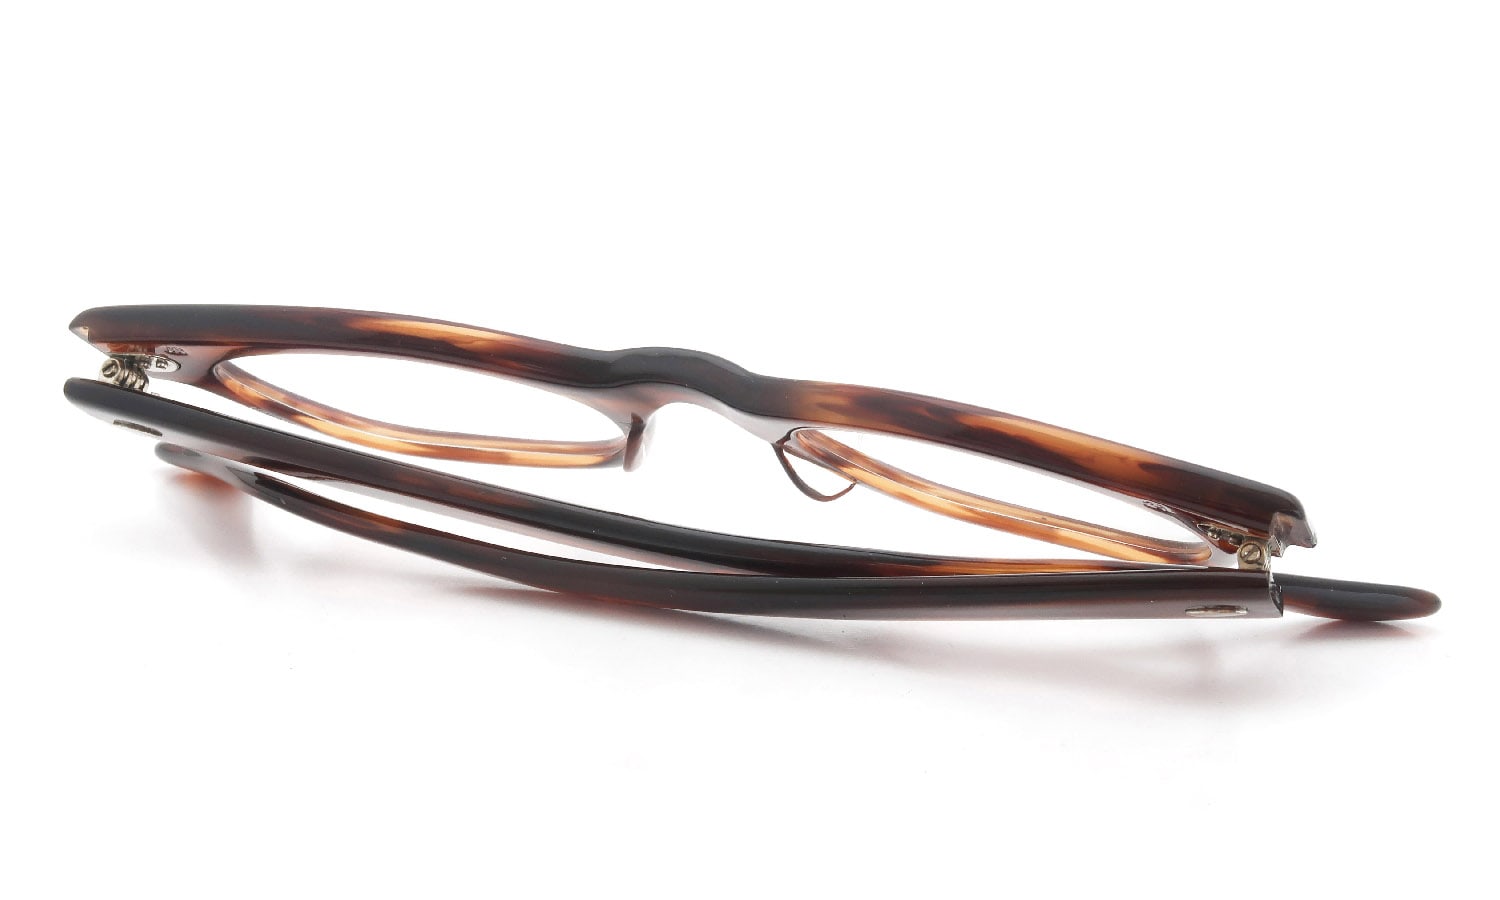 The Spectacle/TART Optical vintage COUNTDOWN AMBER 48-24